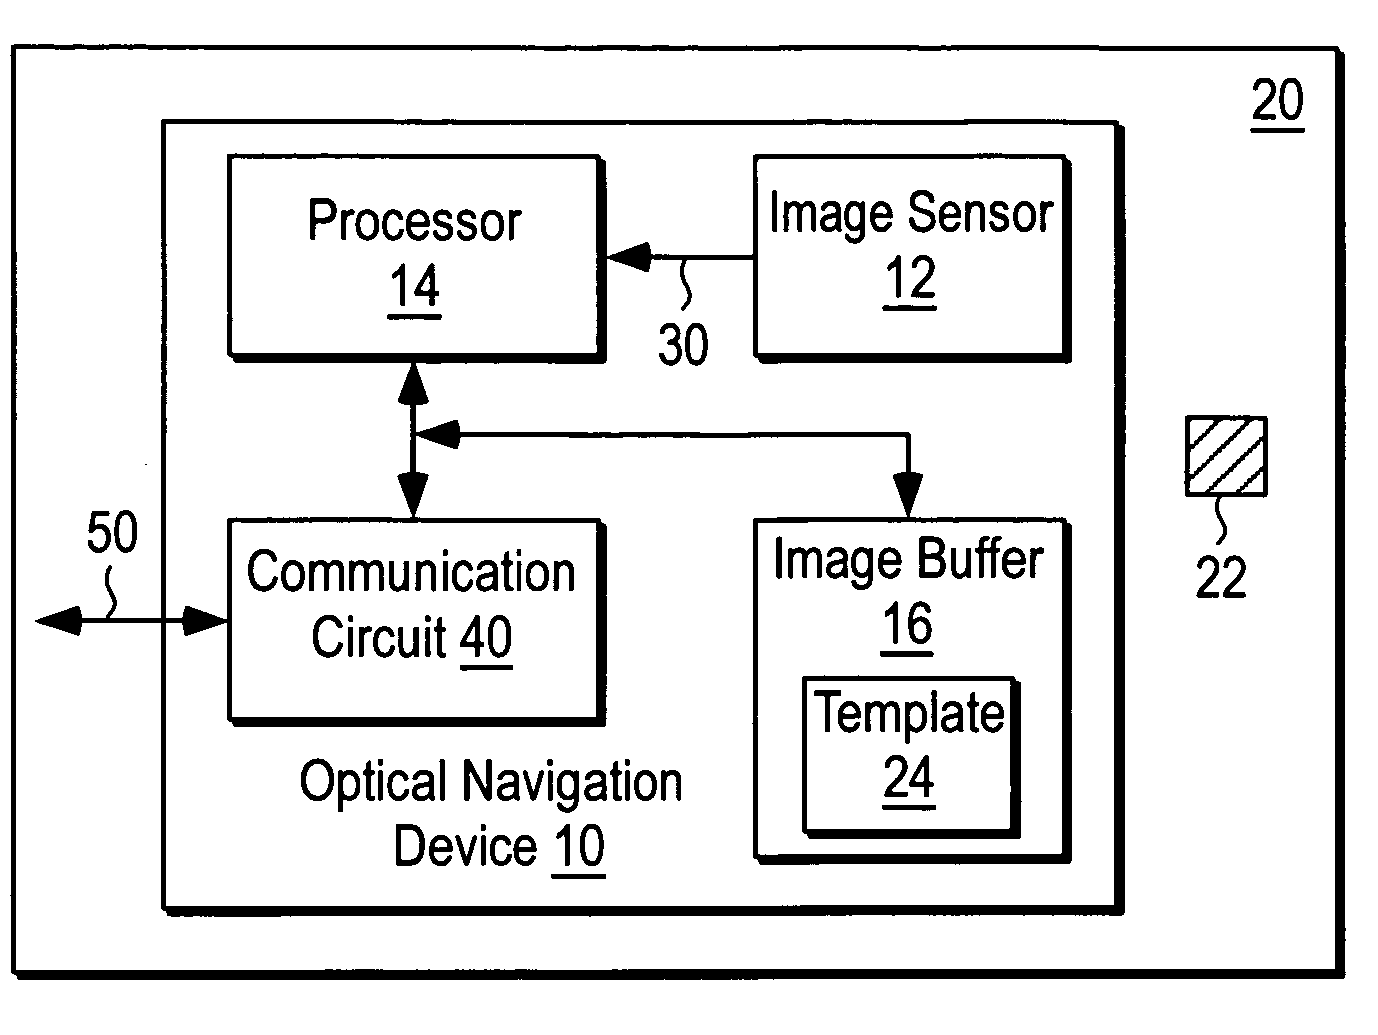 Pattern detection using an optical navigation device